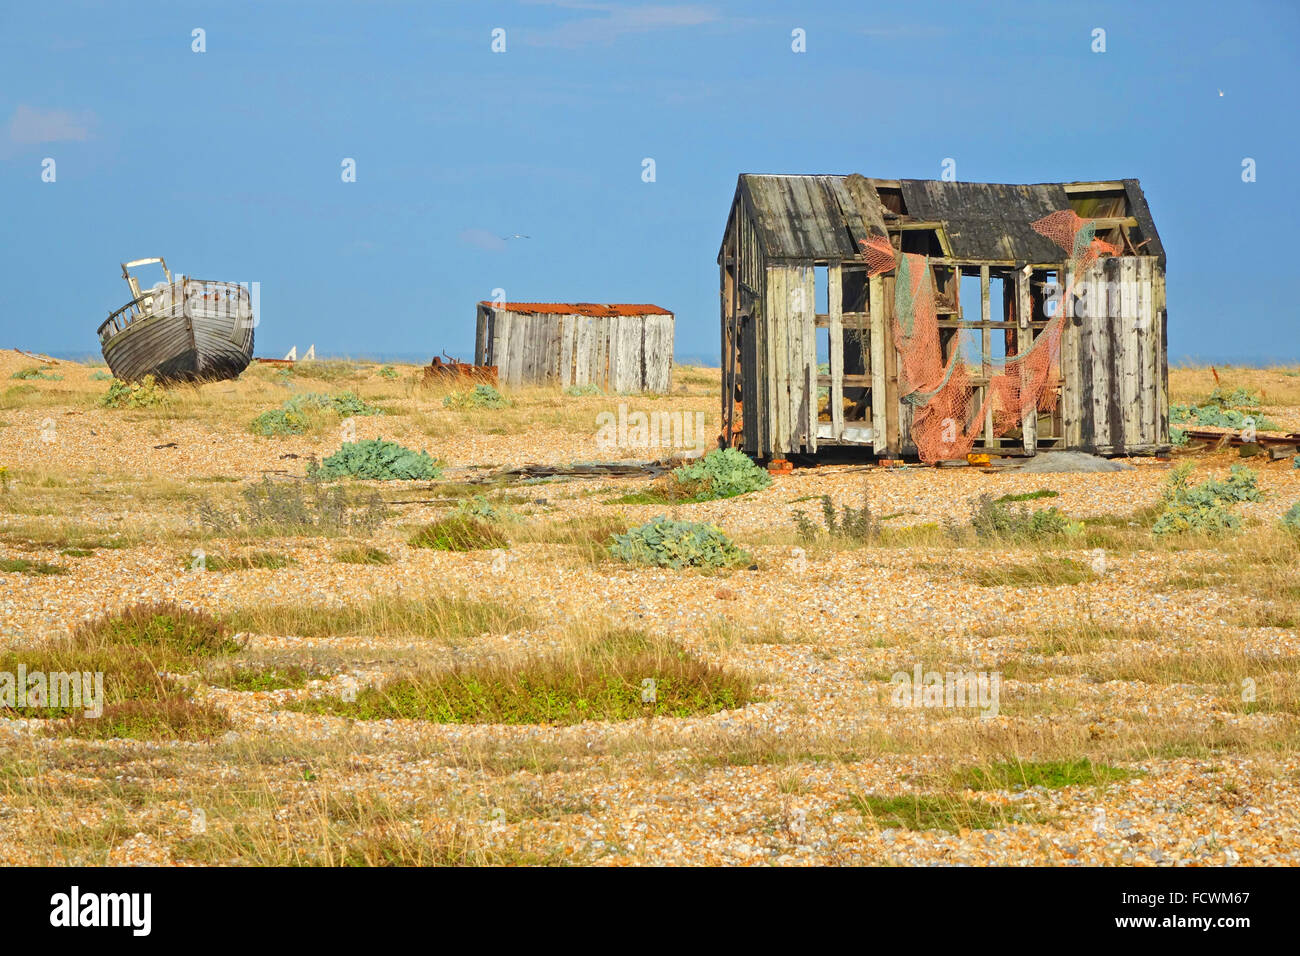 Picturesque old abandoned fishing boat & fishermen's shacks on Dungeness beach, Kent, UK the desolate landscape a favourite location for photographers Stock Photo